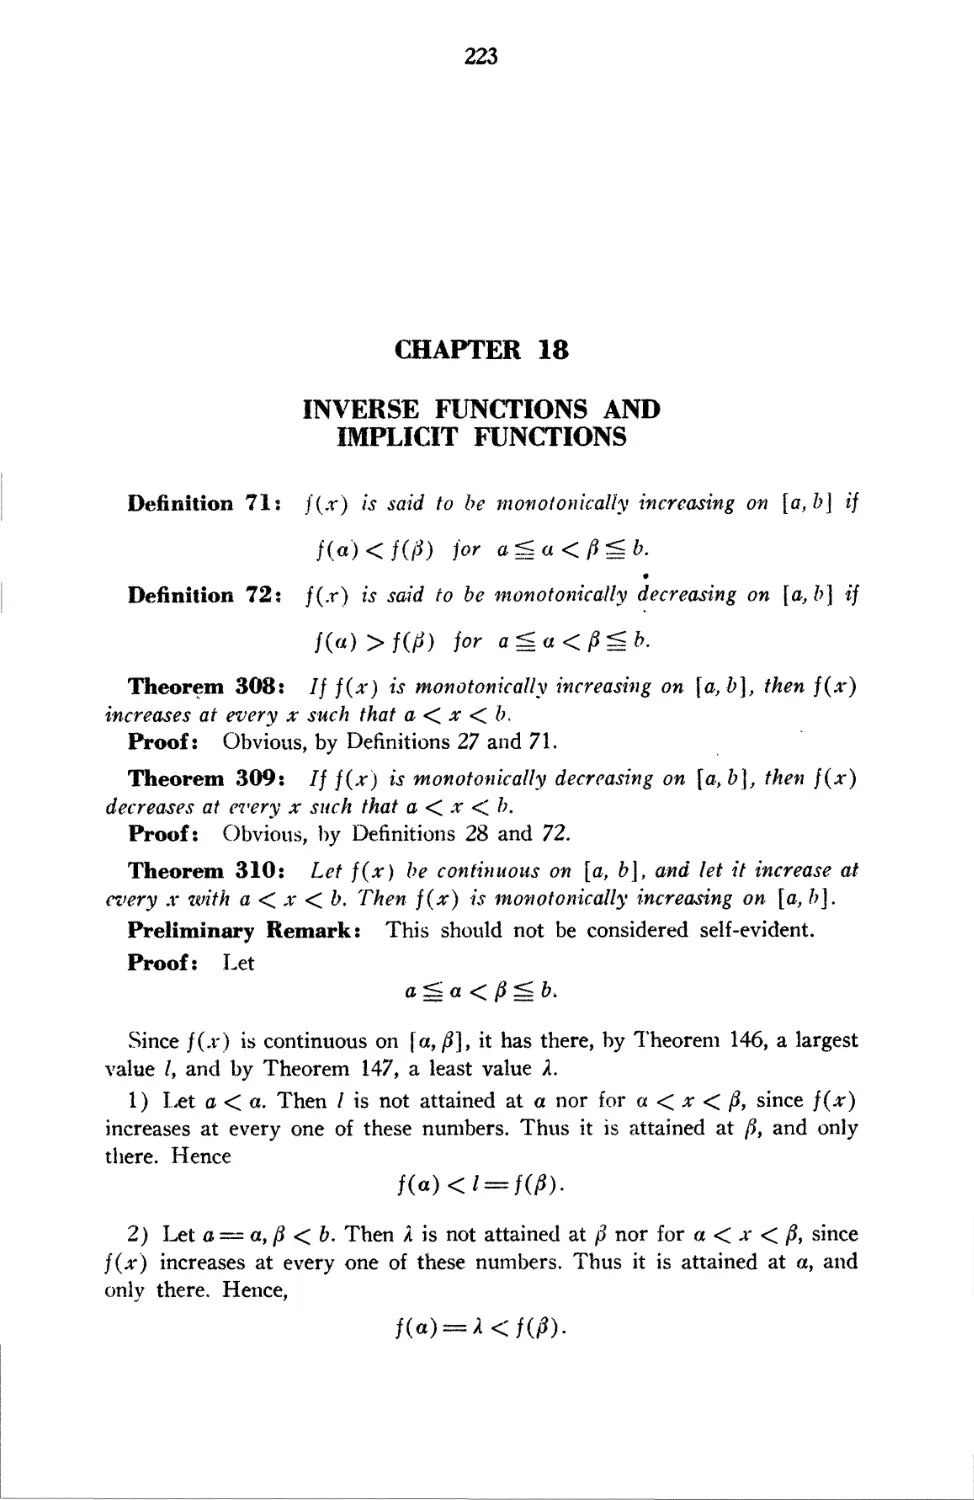 Chapter 18 Inverse Functions and Implicit Functions